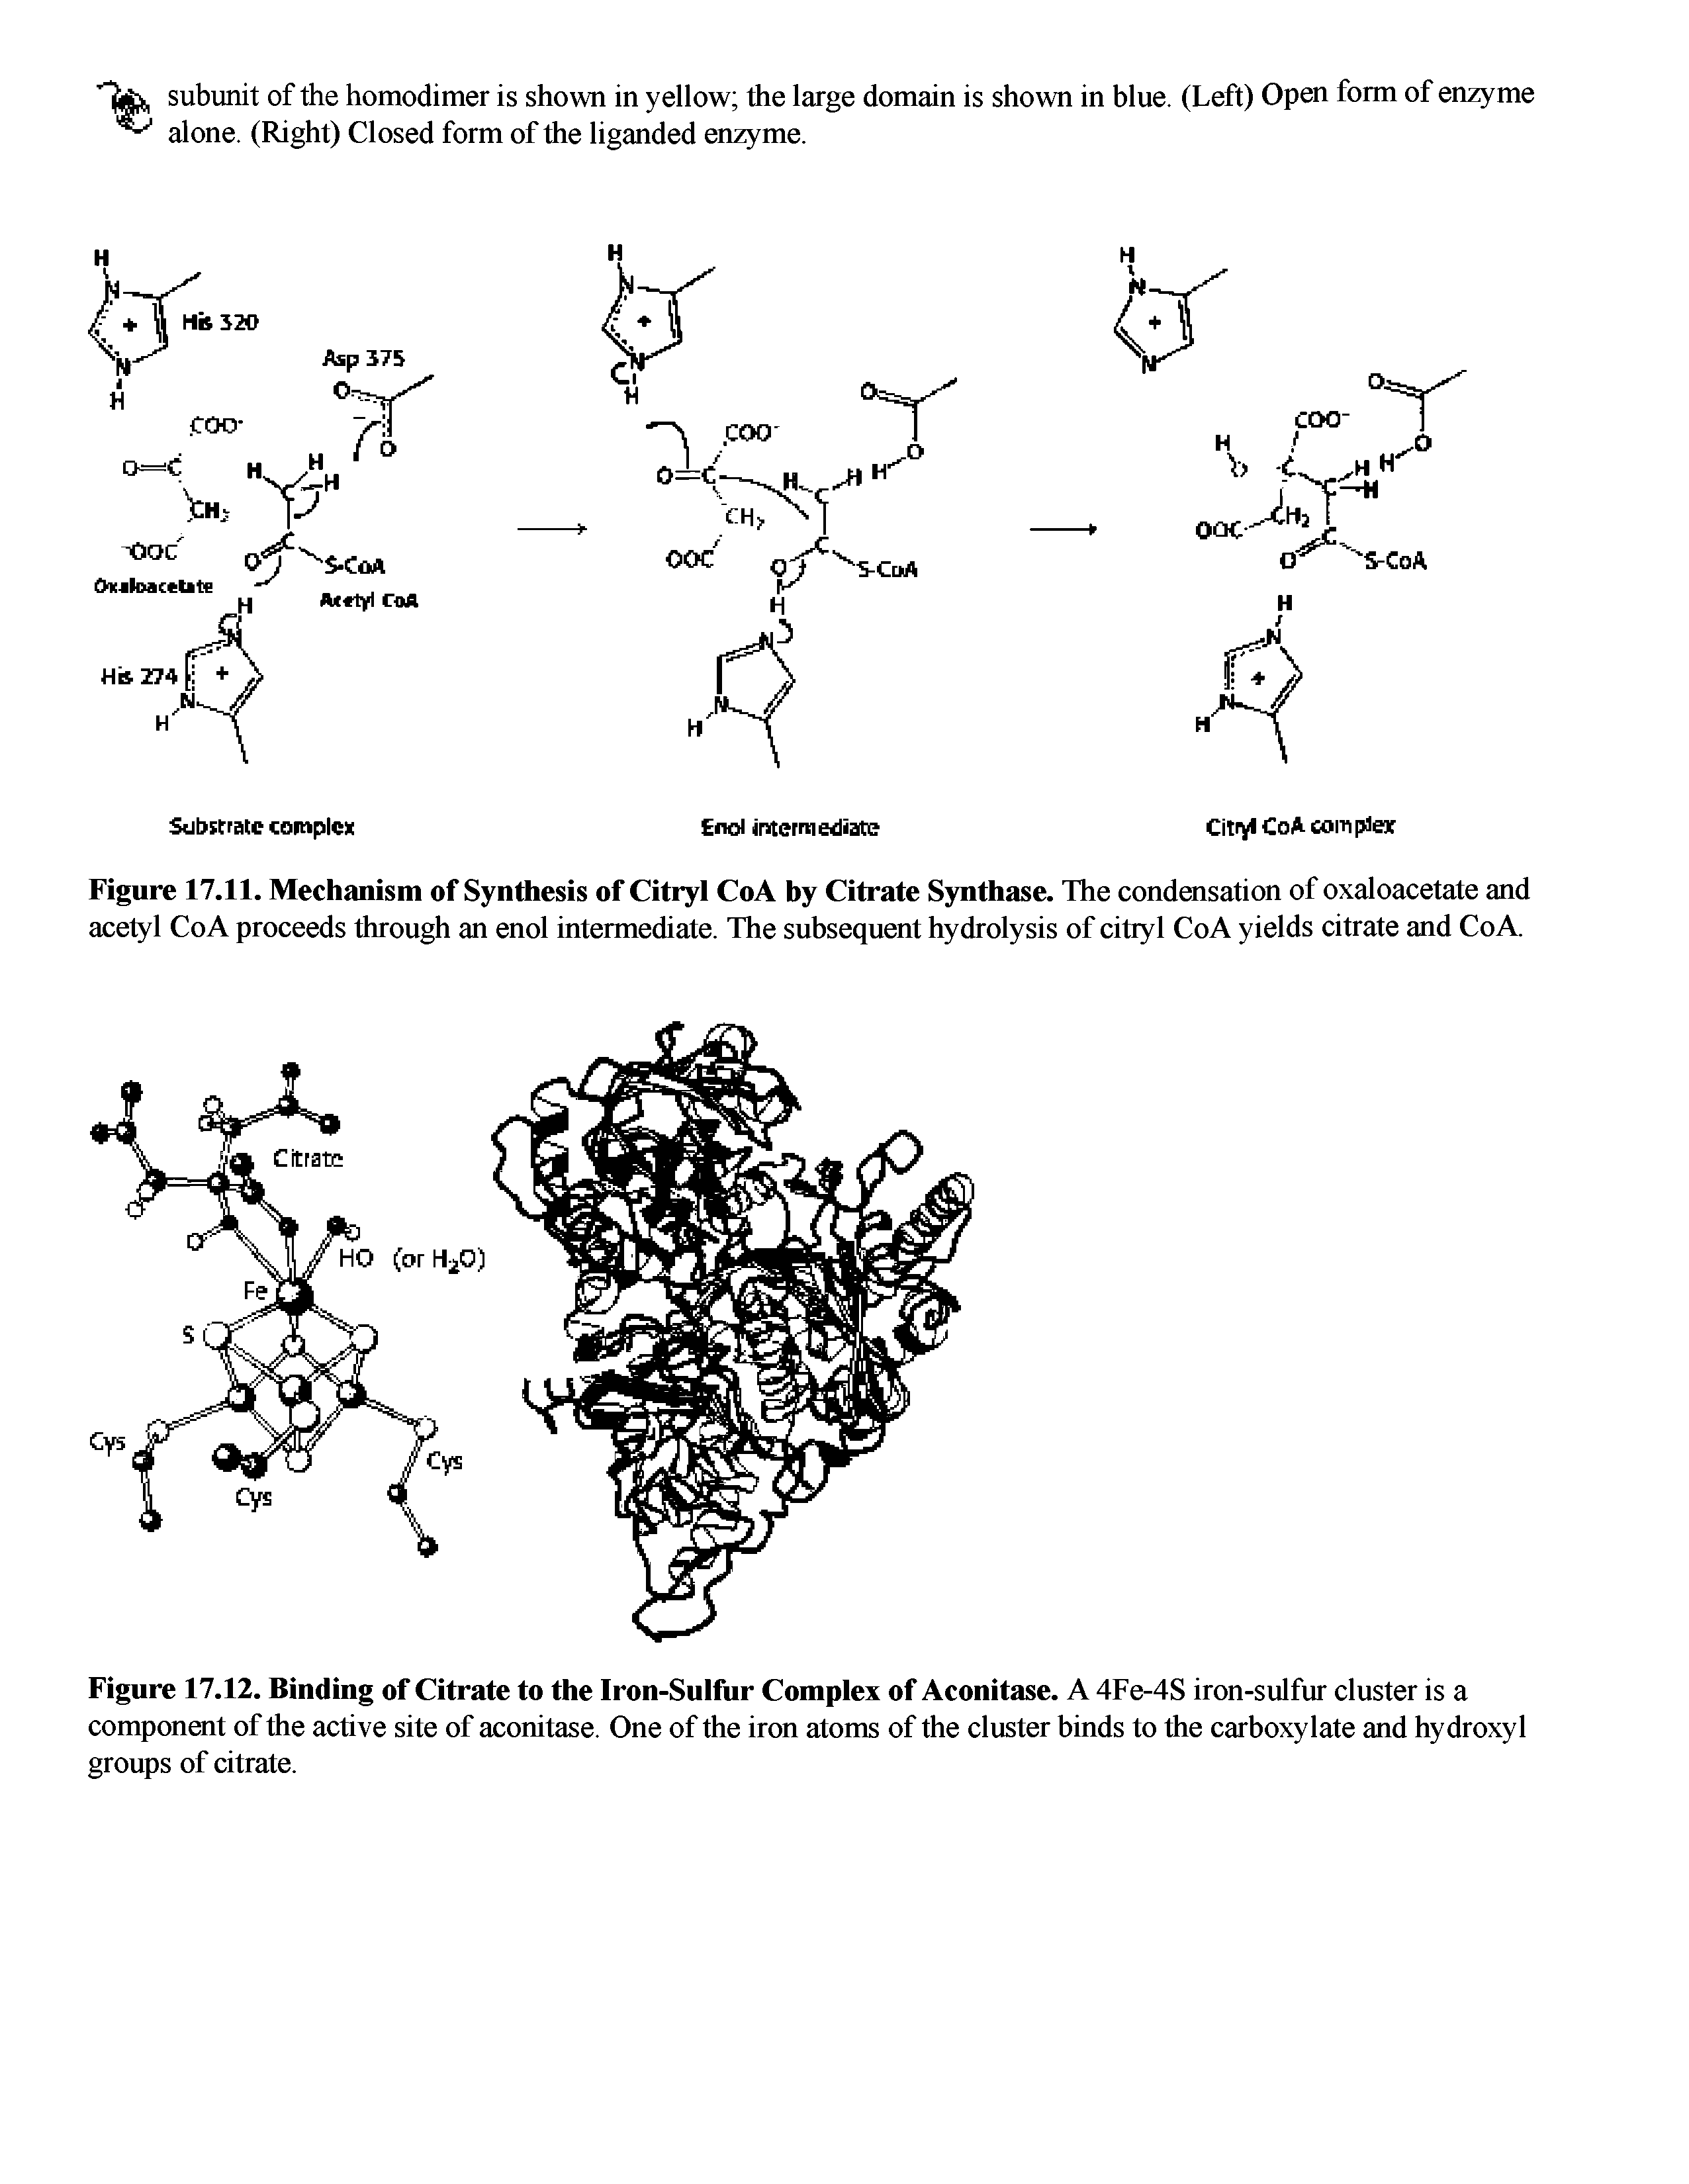 Figure 17.12. Binding of Citrate to the Iron-Sulfur Complex of Aconitase. A 4Fe-4S iron-sulfur cluster is a component of the active site of aconitase. One of the iron atoms of the cluster binds to the carboxylate and hydroxyl groups of citrate.